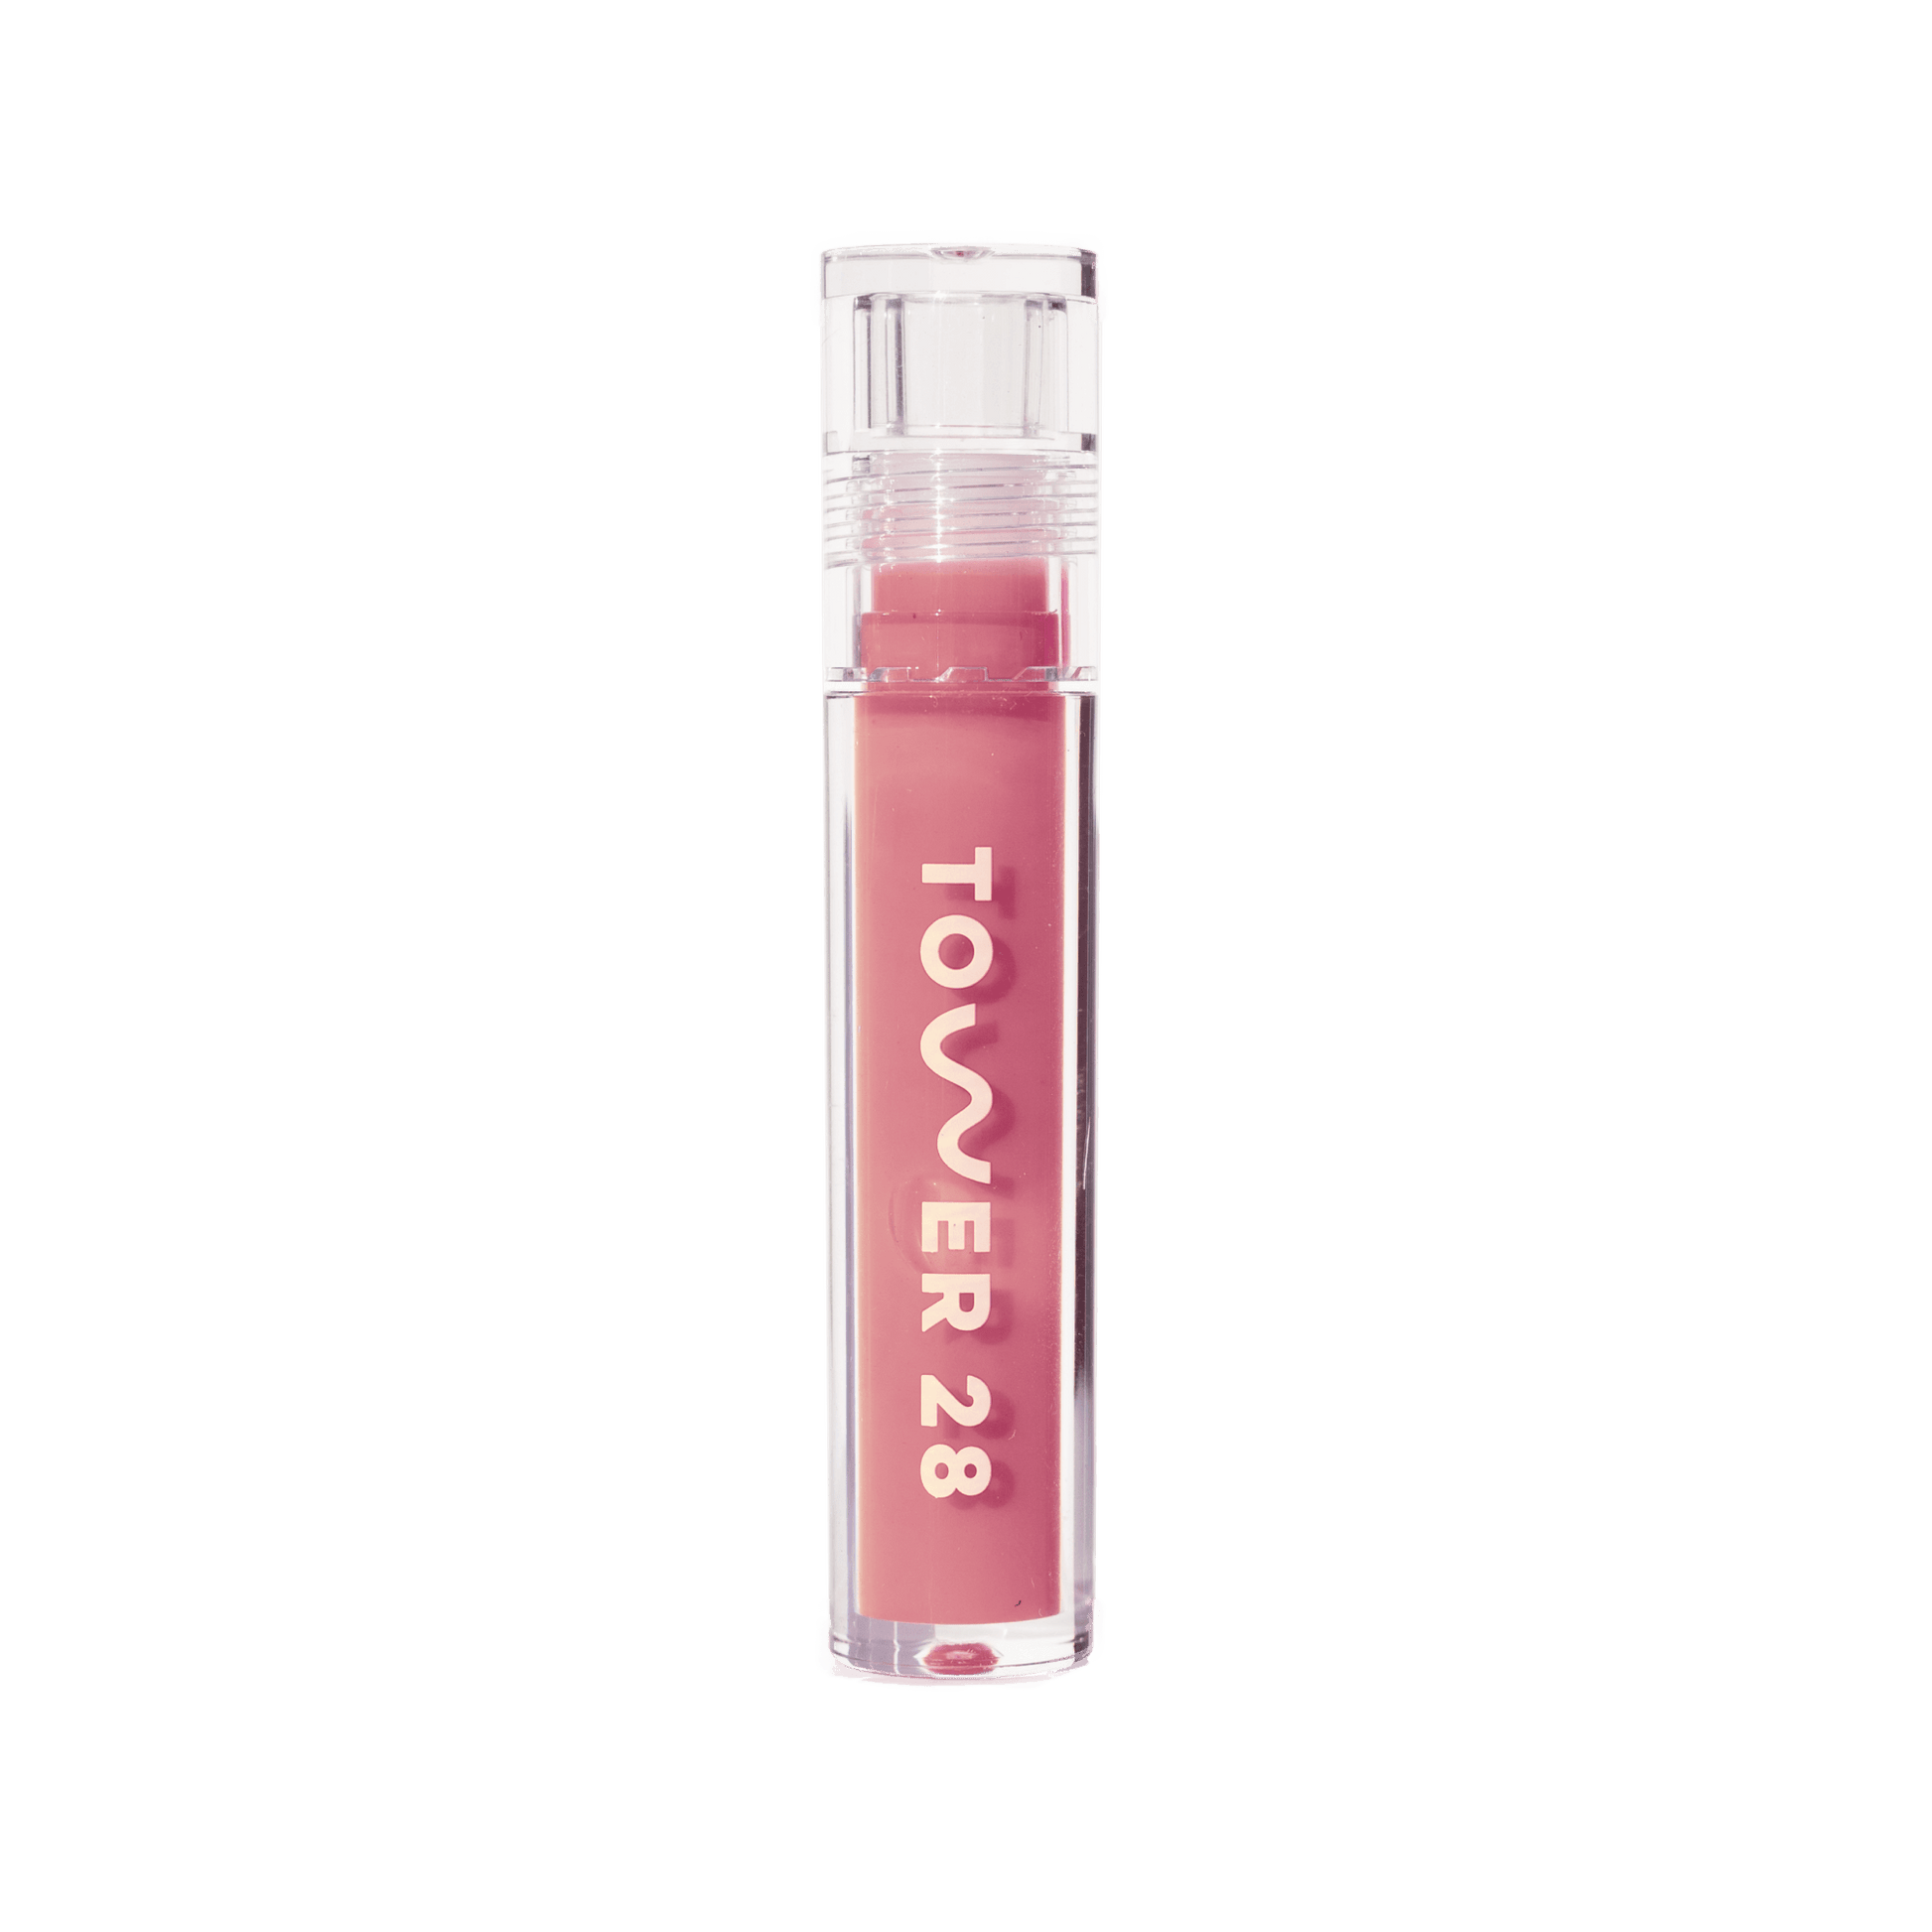 The Tower 28 Beauty ShineOn Lip Jelly in the shade Pistachio